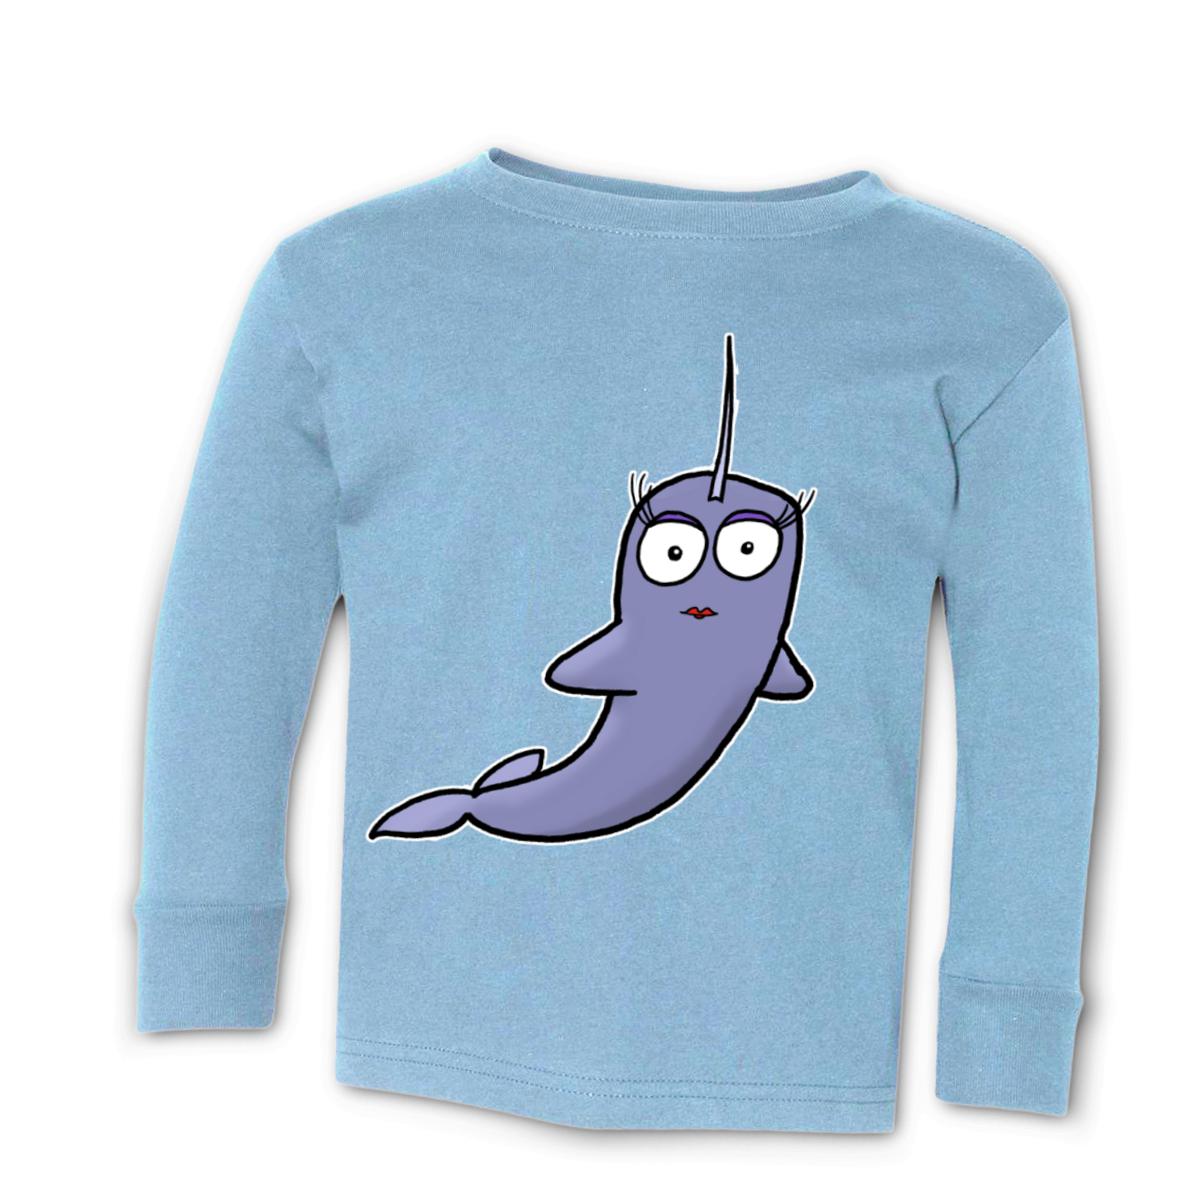 Narwhal Kid's Long Sleeve Tee Large light-blue